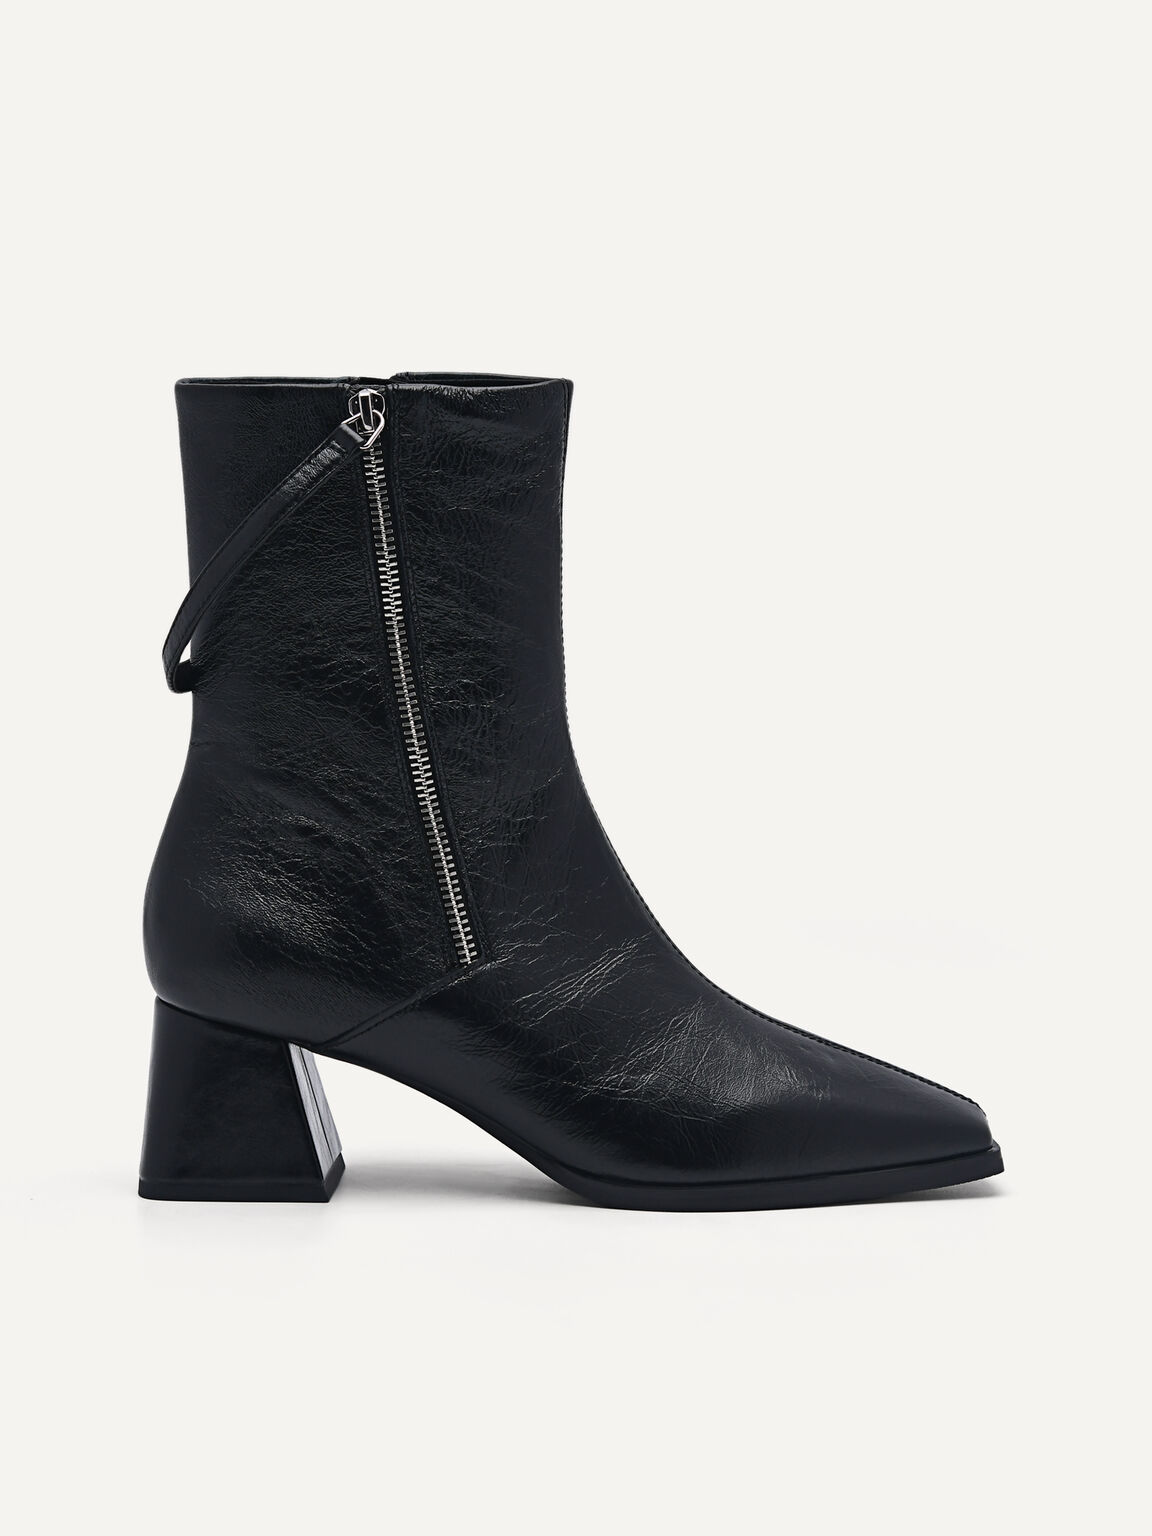 Leather Weimar Ankle Boots, Black